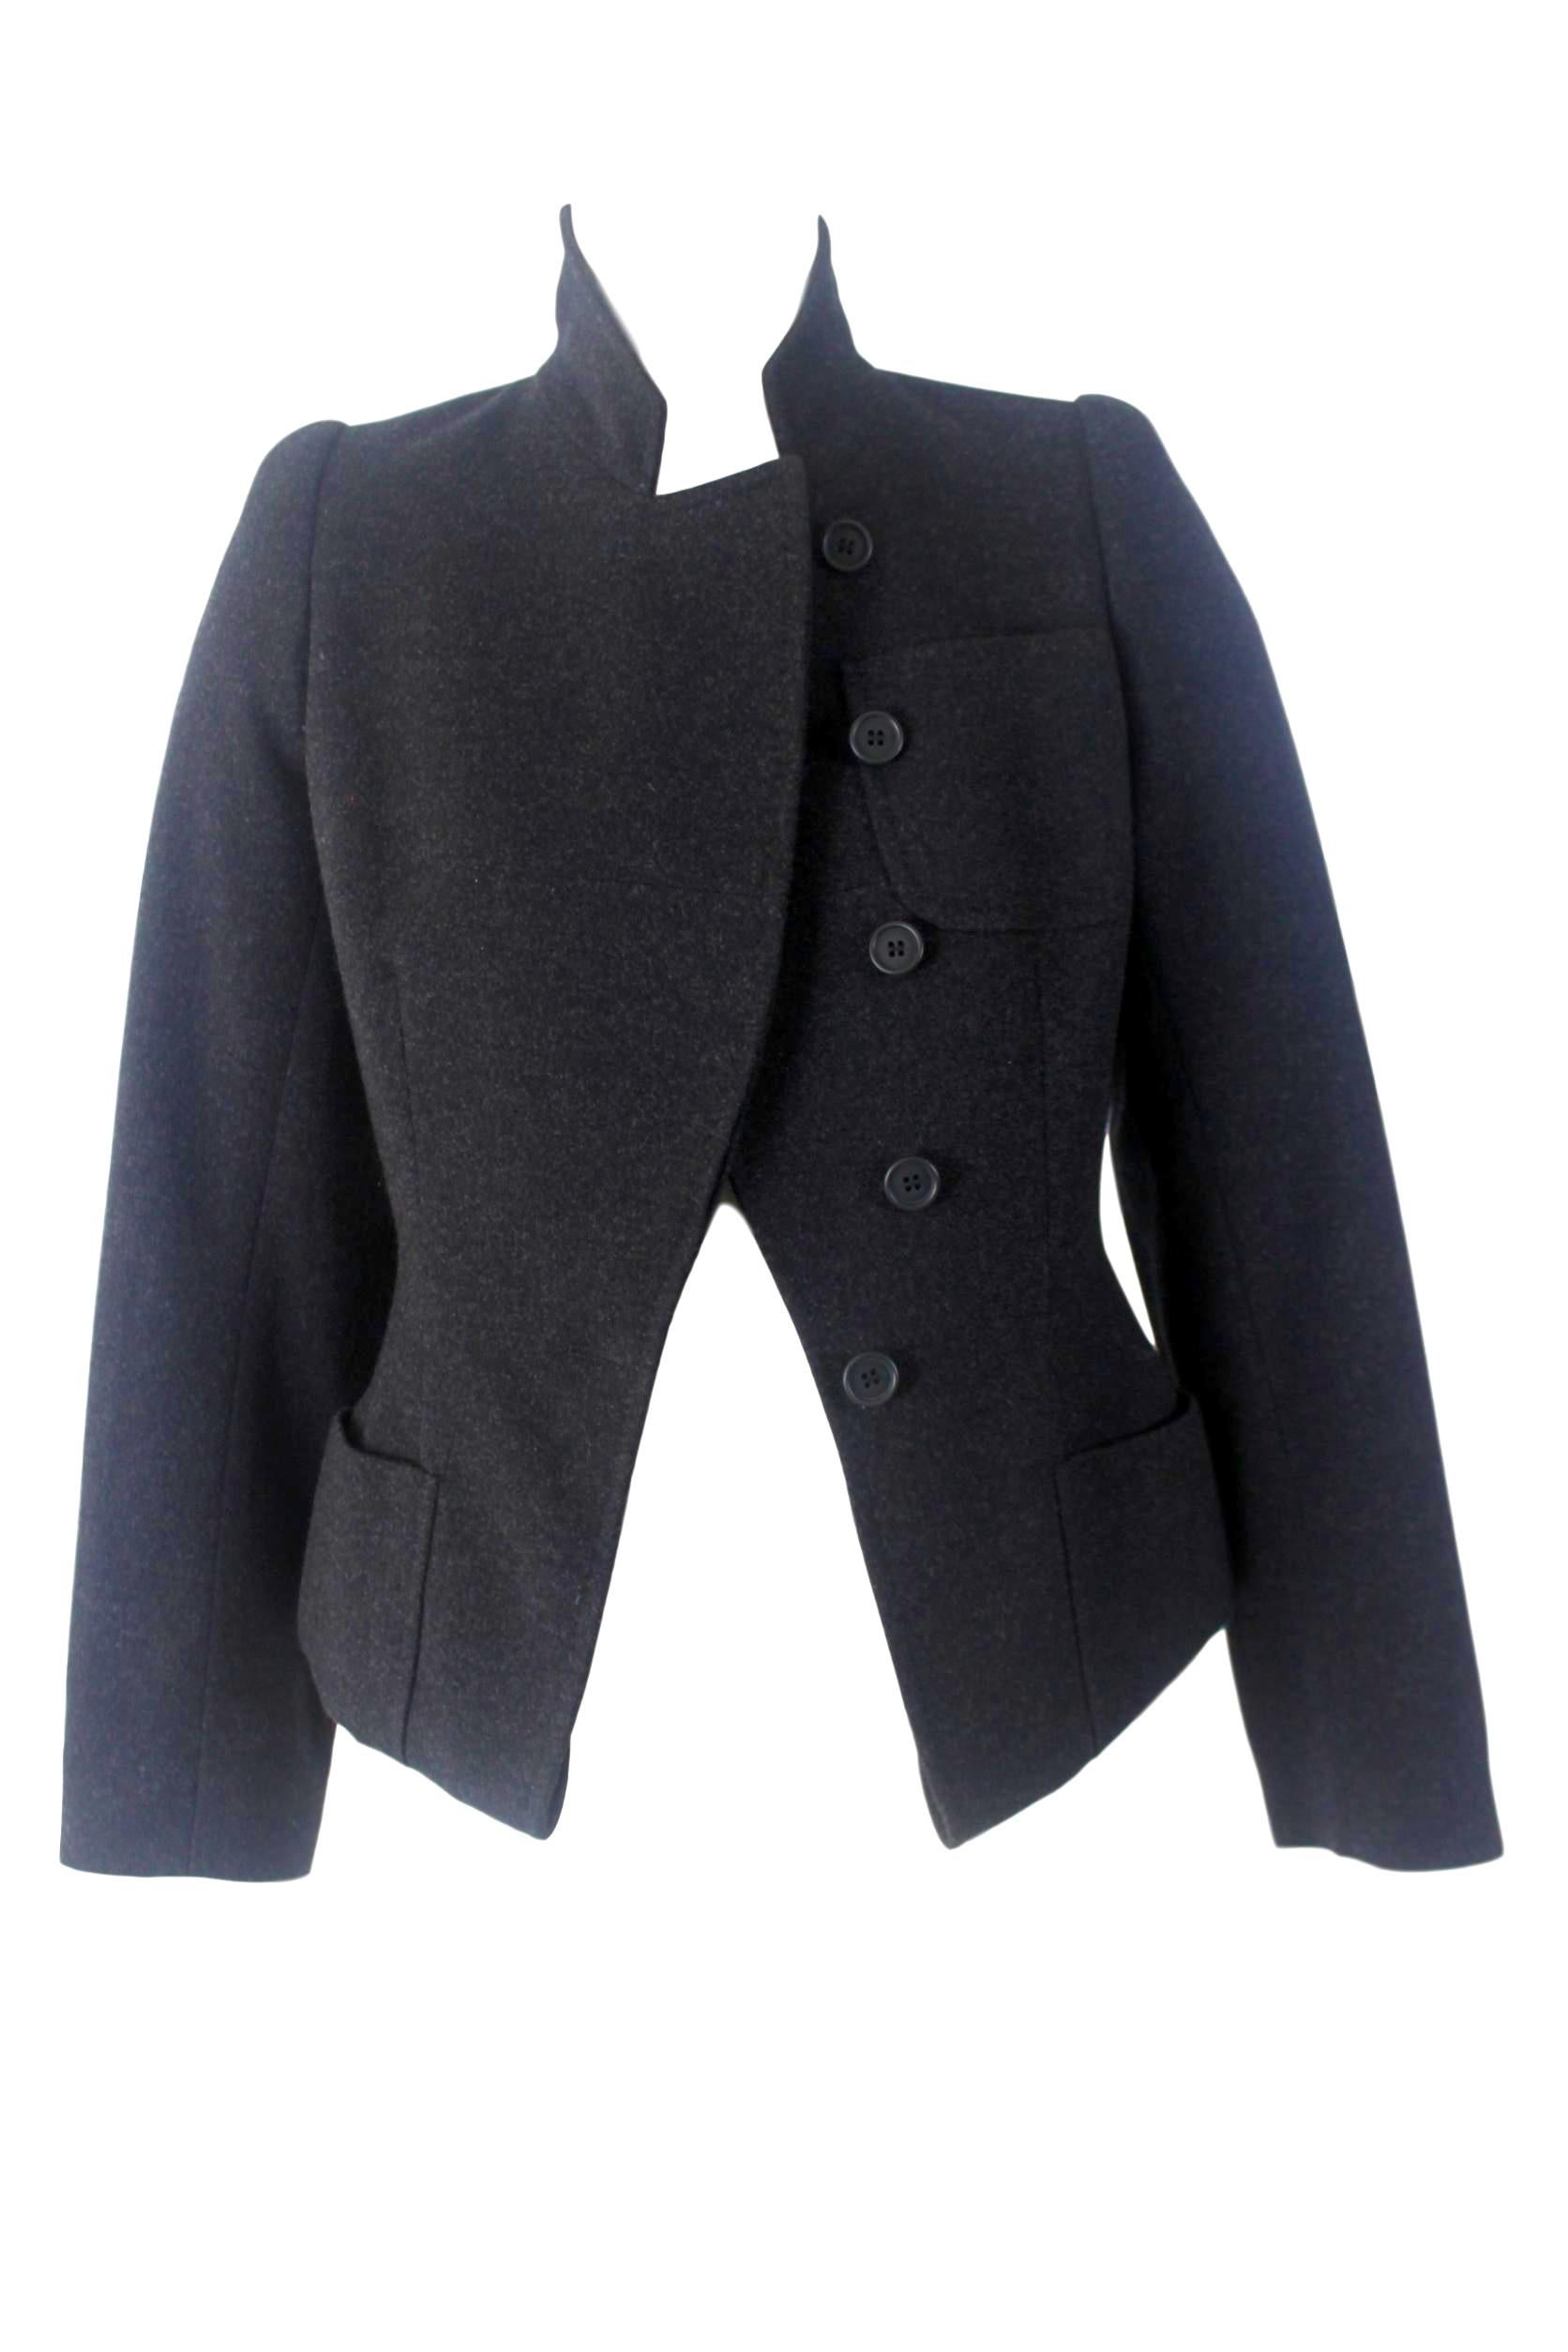 Alexander McQueen 
Wool and Cashmere Jacket
Labelled Size 40
Jacket has deep hem creating a peplum
This is intentional and can be viewed on runway